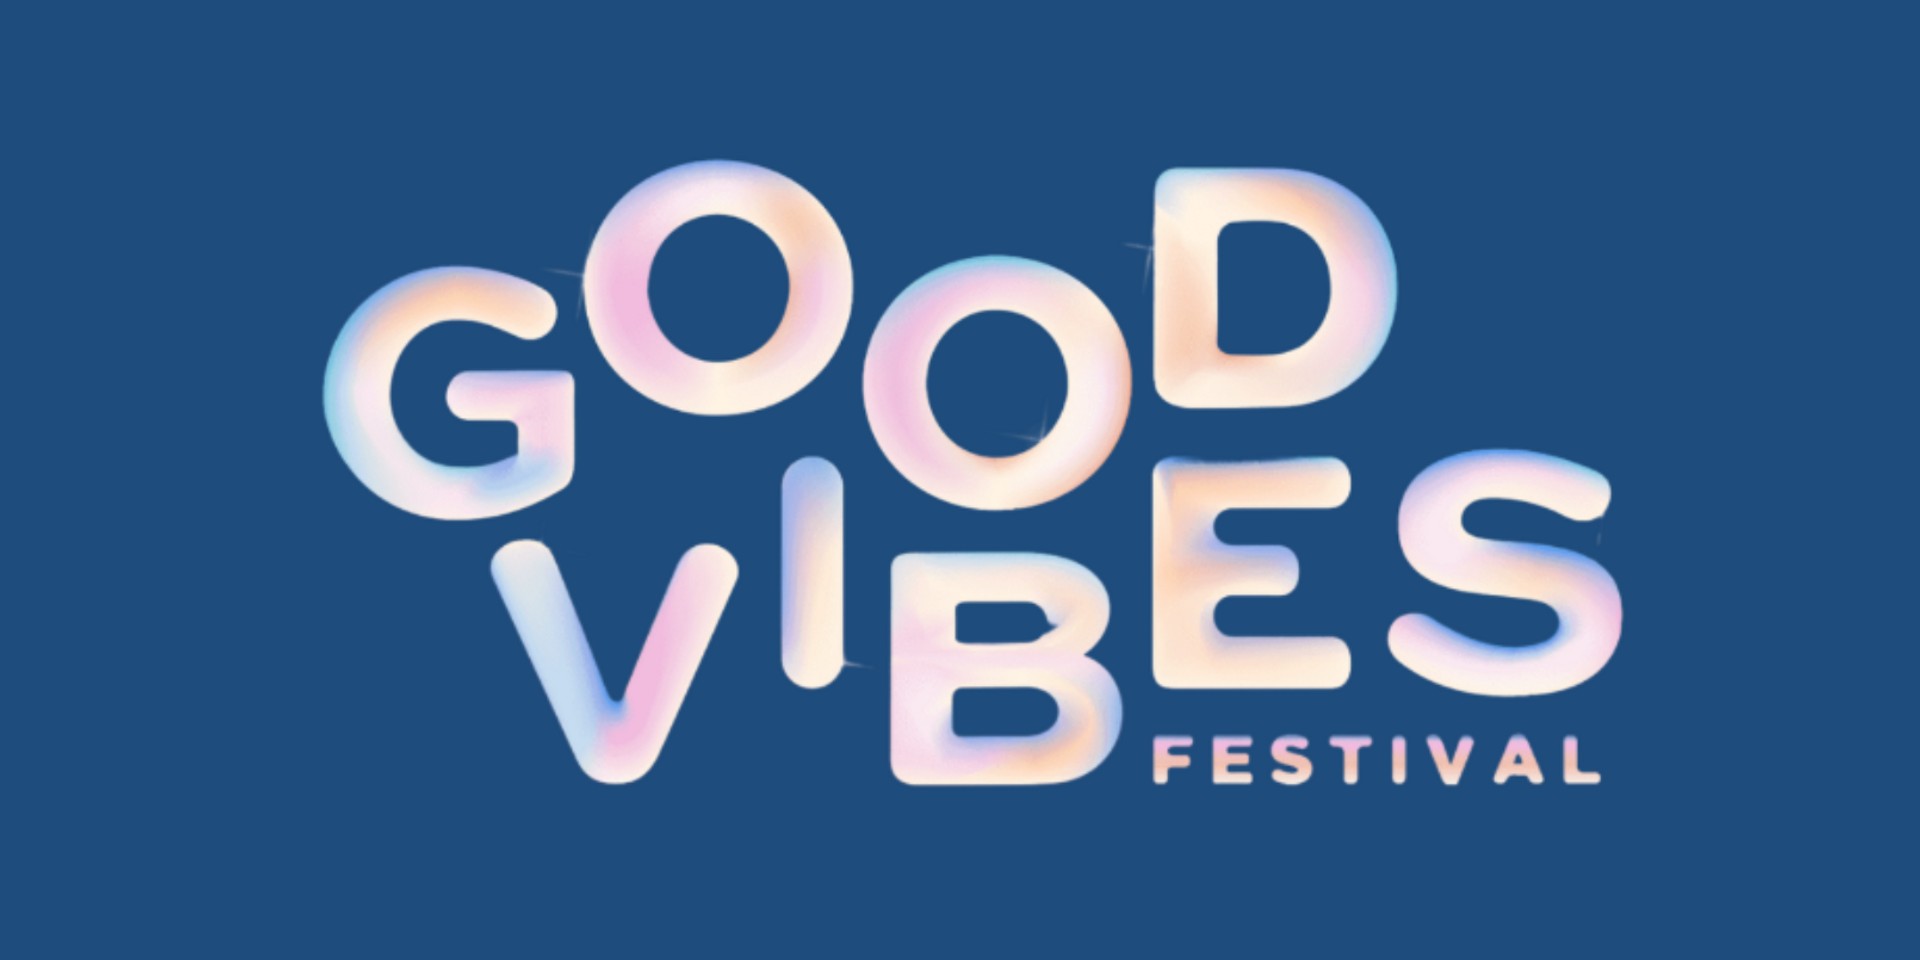 Good Vibes Festival 2023: "The 1975 performance had to be cut short due to non-compliance with local performance guidelines."